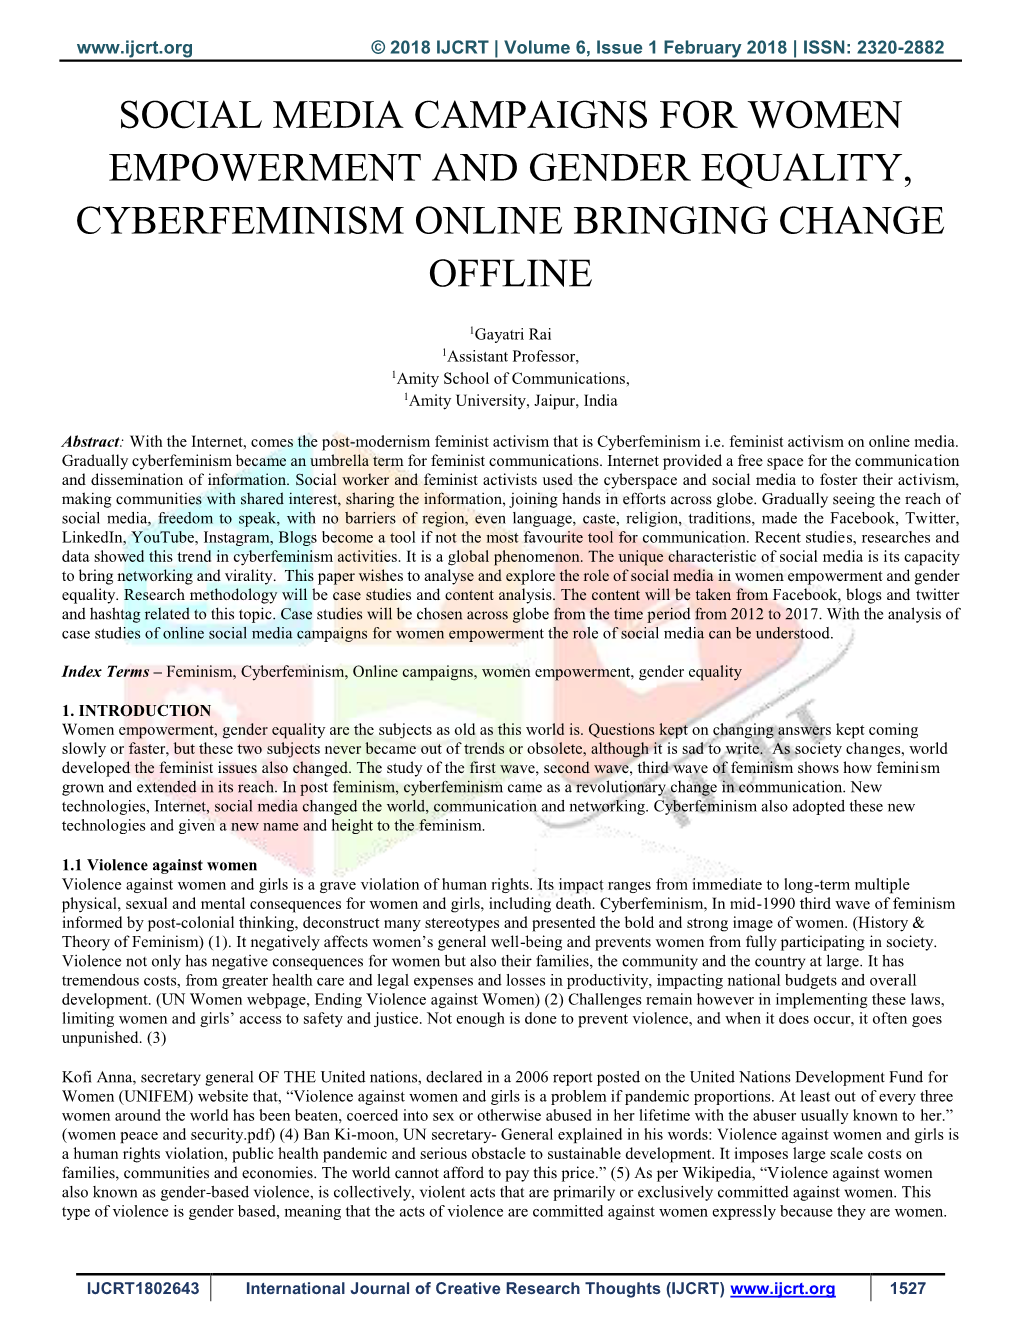 Social Media Campaigns for Women Empowerment and Gender Equality, Cyberfeminism Online Bringing Change Offline